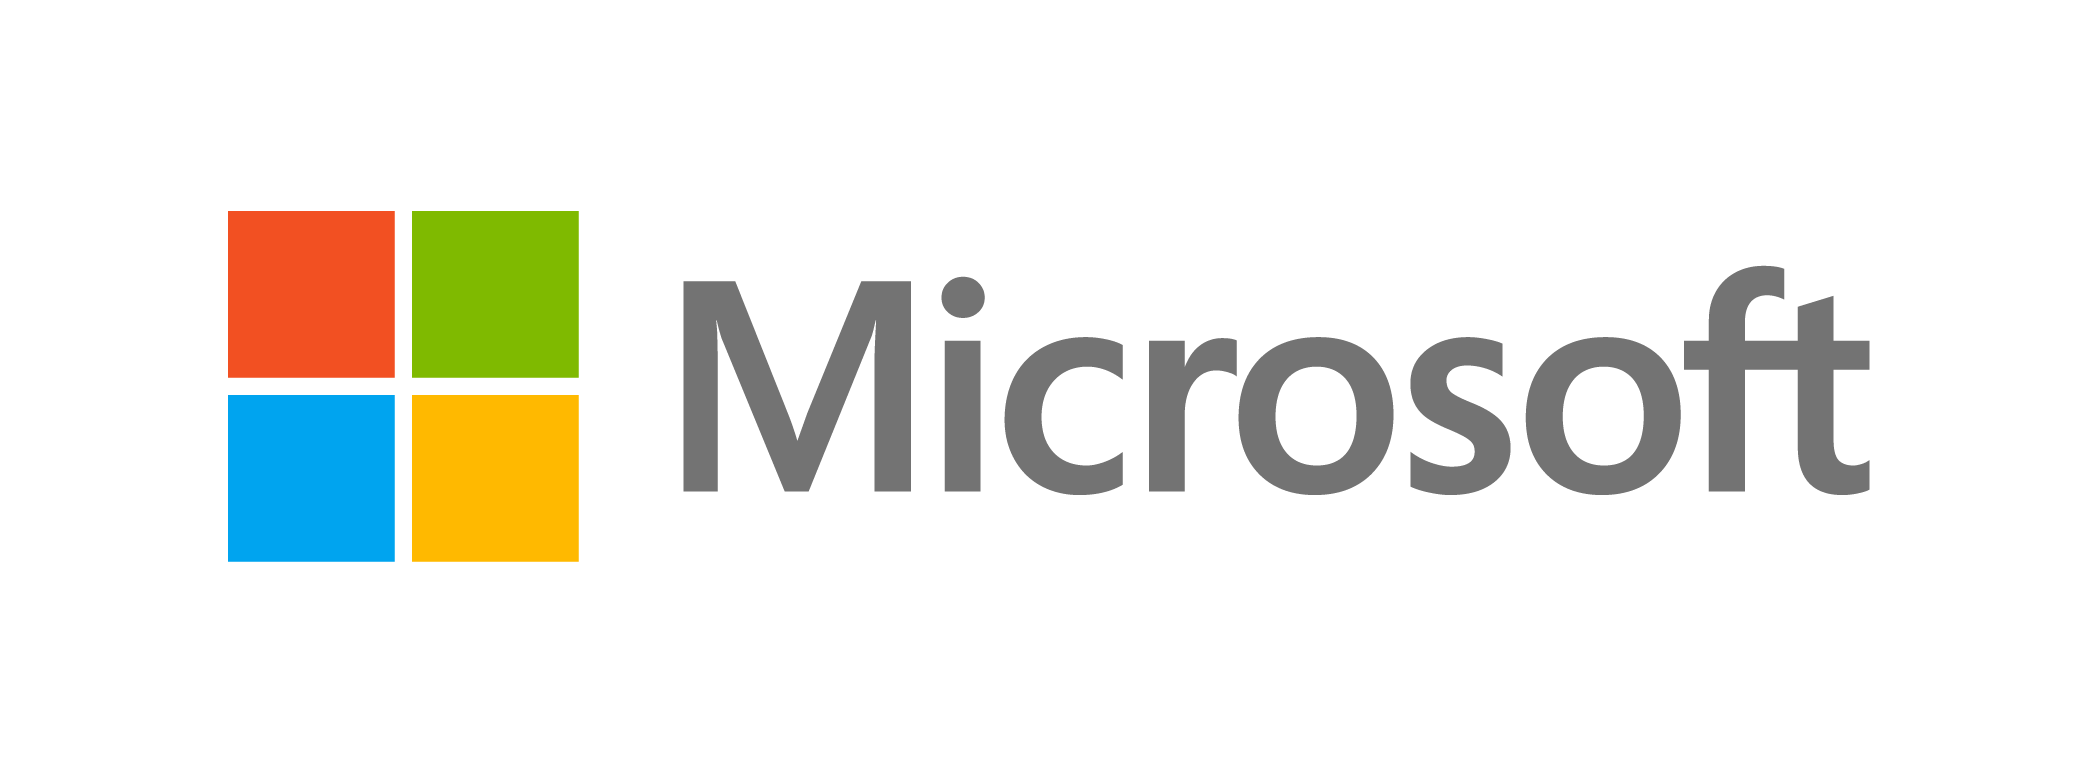 American Technology Company Logo - Microsoft Corporation - (abbreviated as MS) is an American